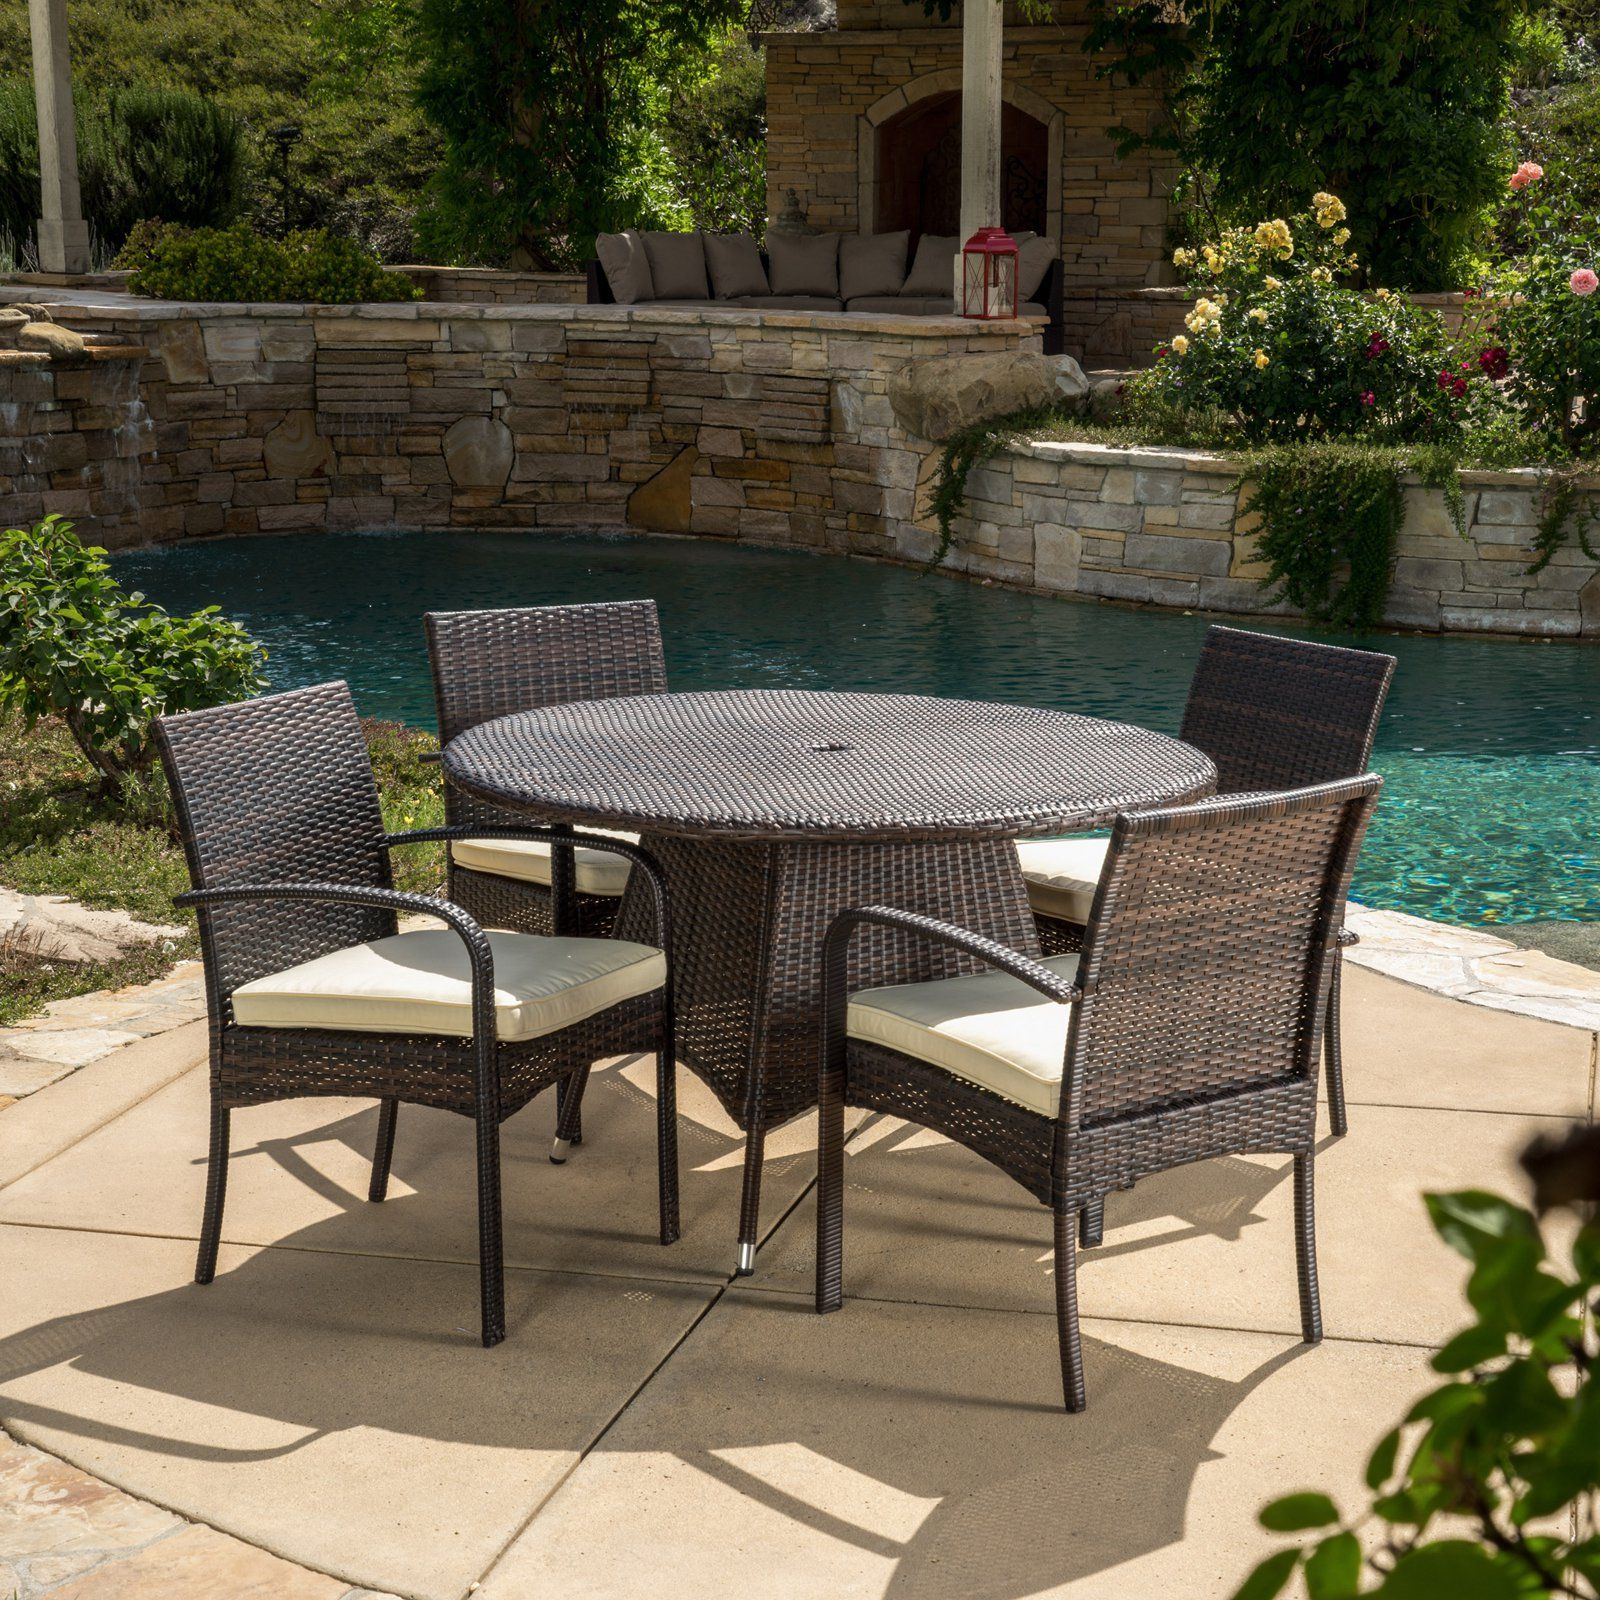 Elizabeth Resin 5 Piece Round Patio Dining Set – Walmart Within Most Recently Released 5 Piece Round Dining Sets (View 11 of 15)